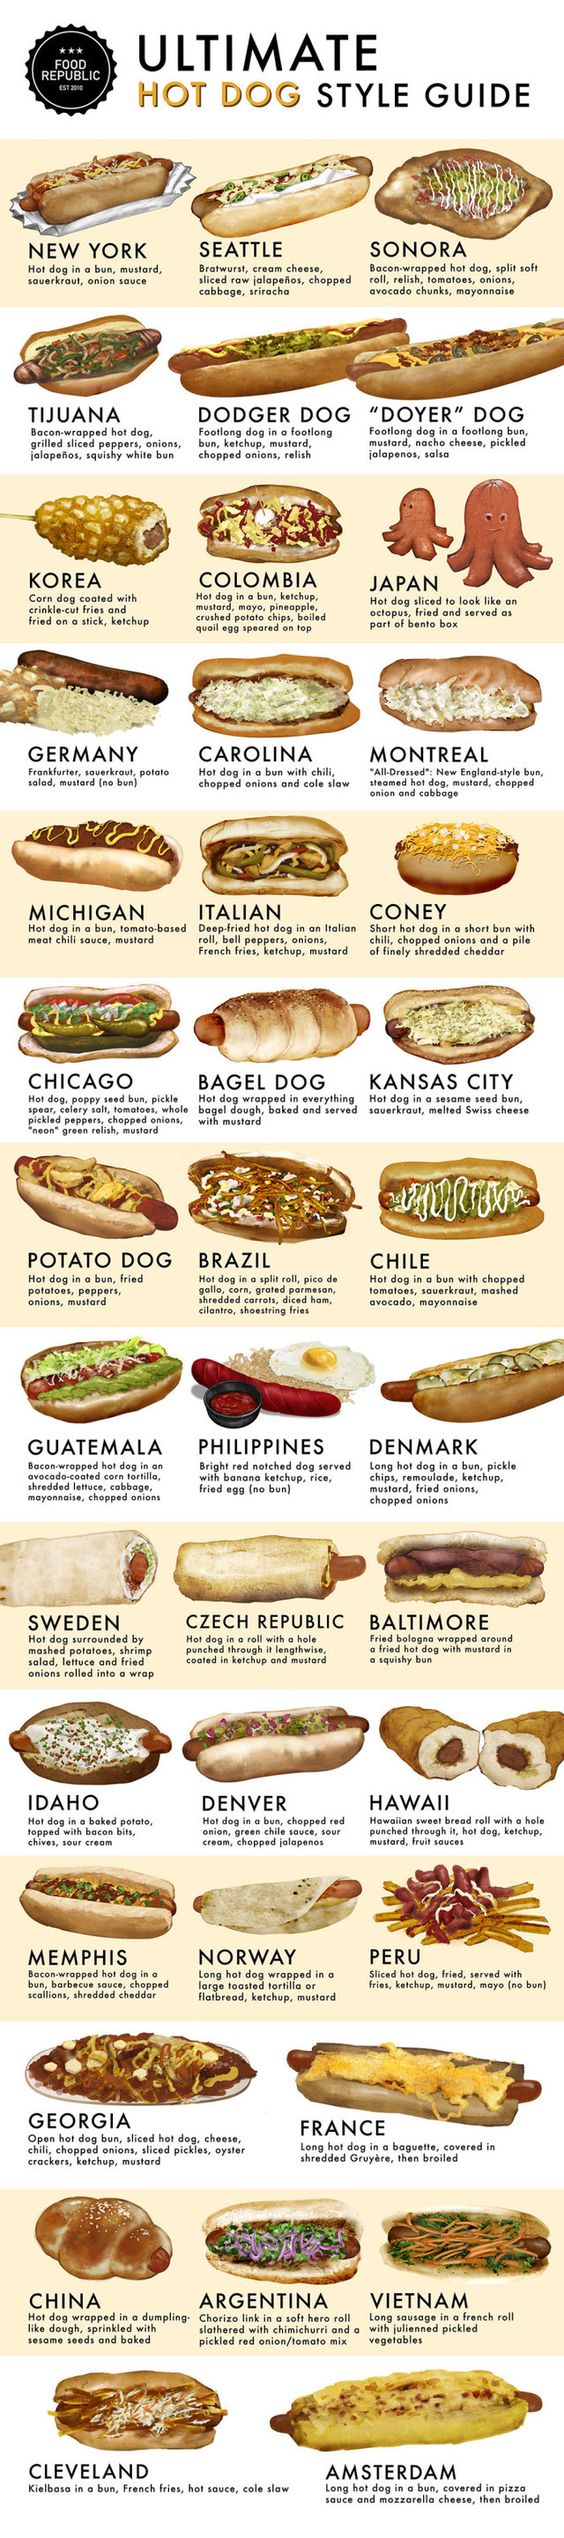 Ultimate Hot Dog Style Guide: Hot Dogs of the World